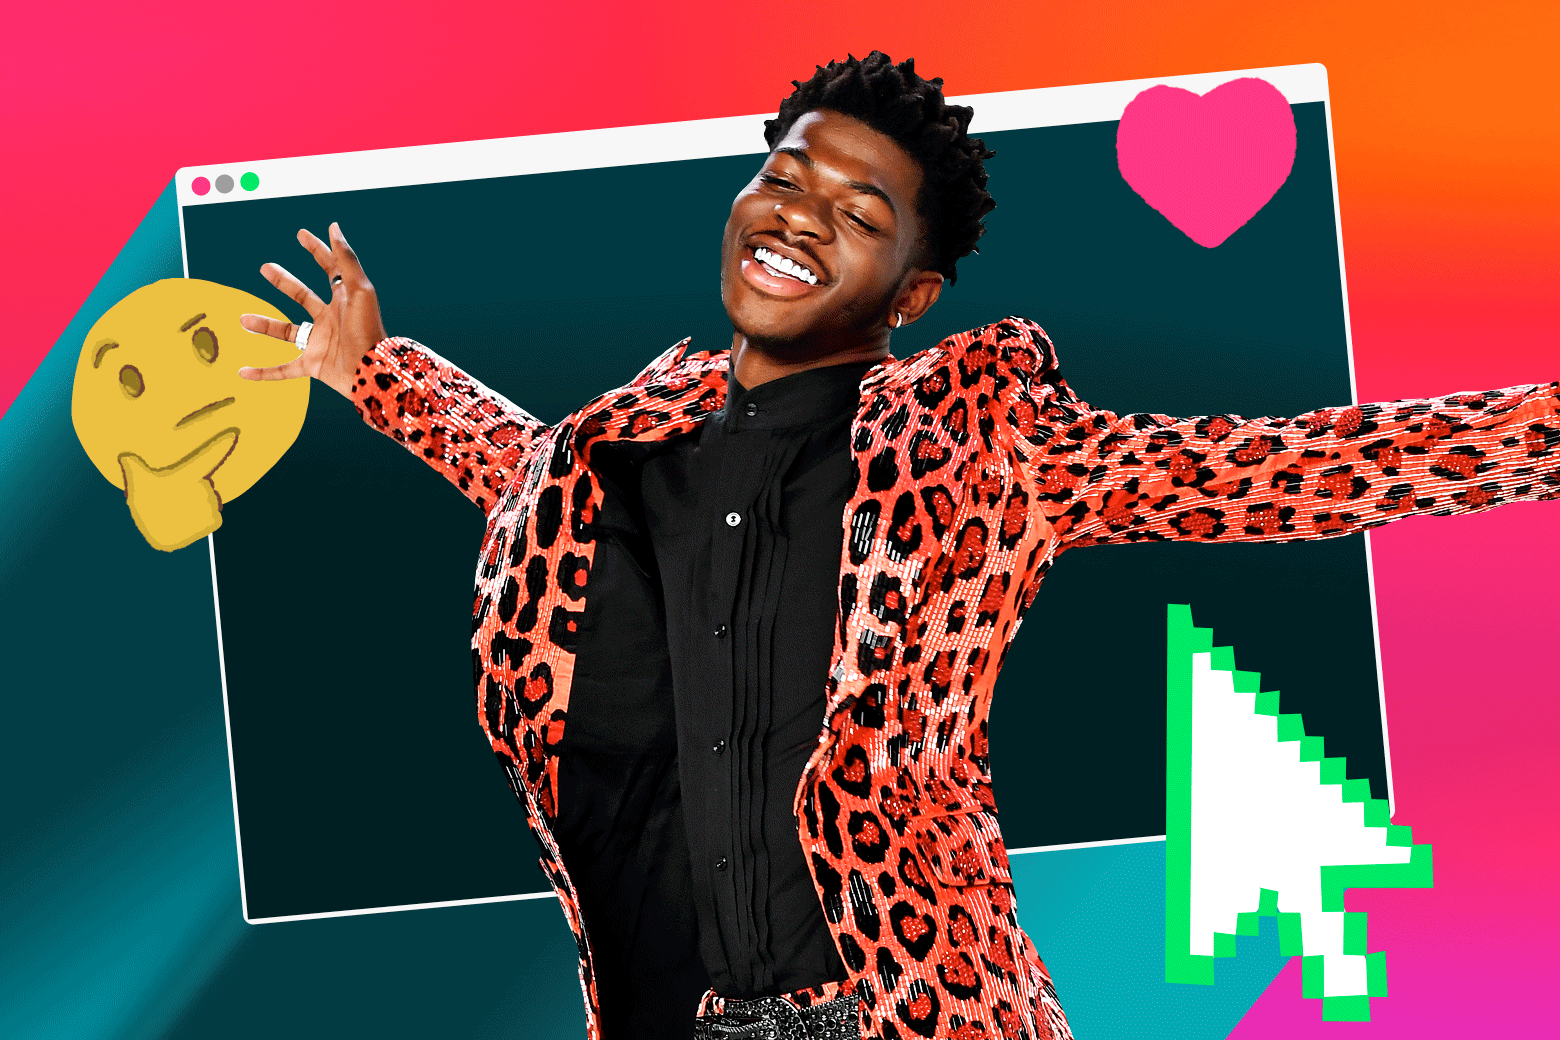 Lil Nas X surrounded by a heart emoji, a click emoji, and a thinking-face emoji.